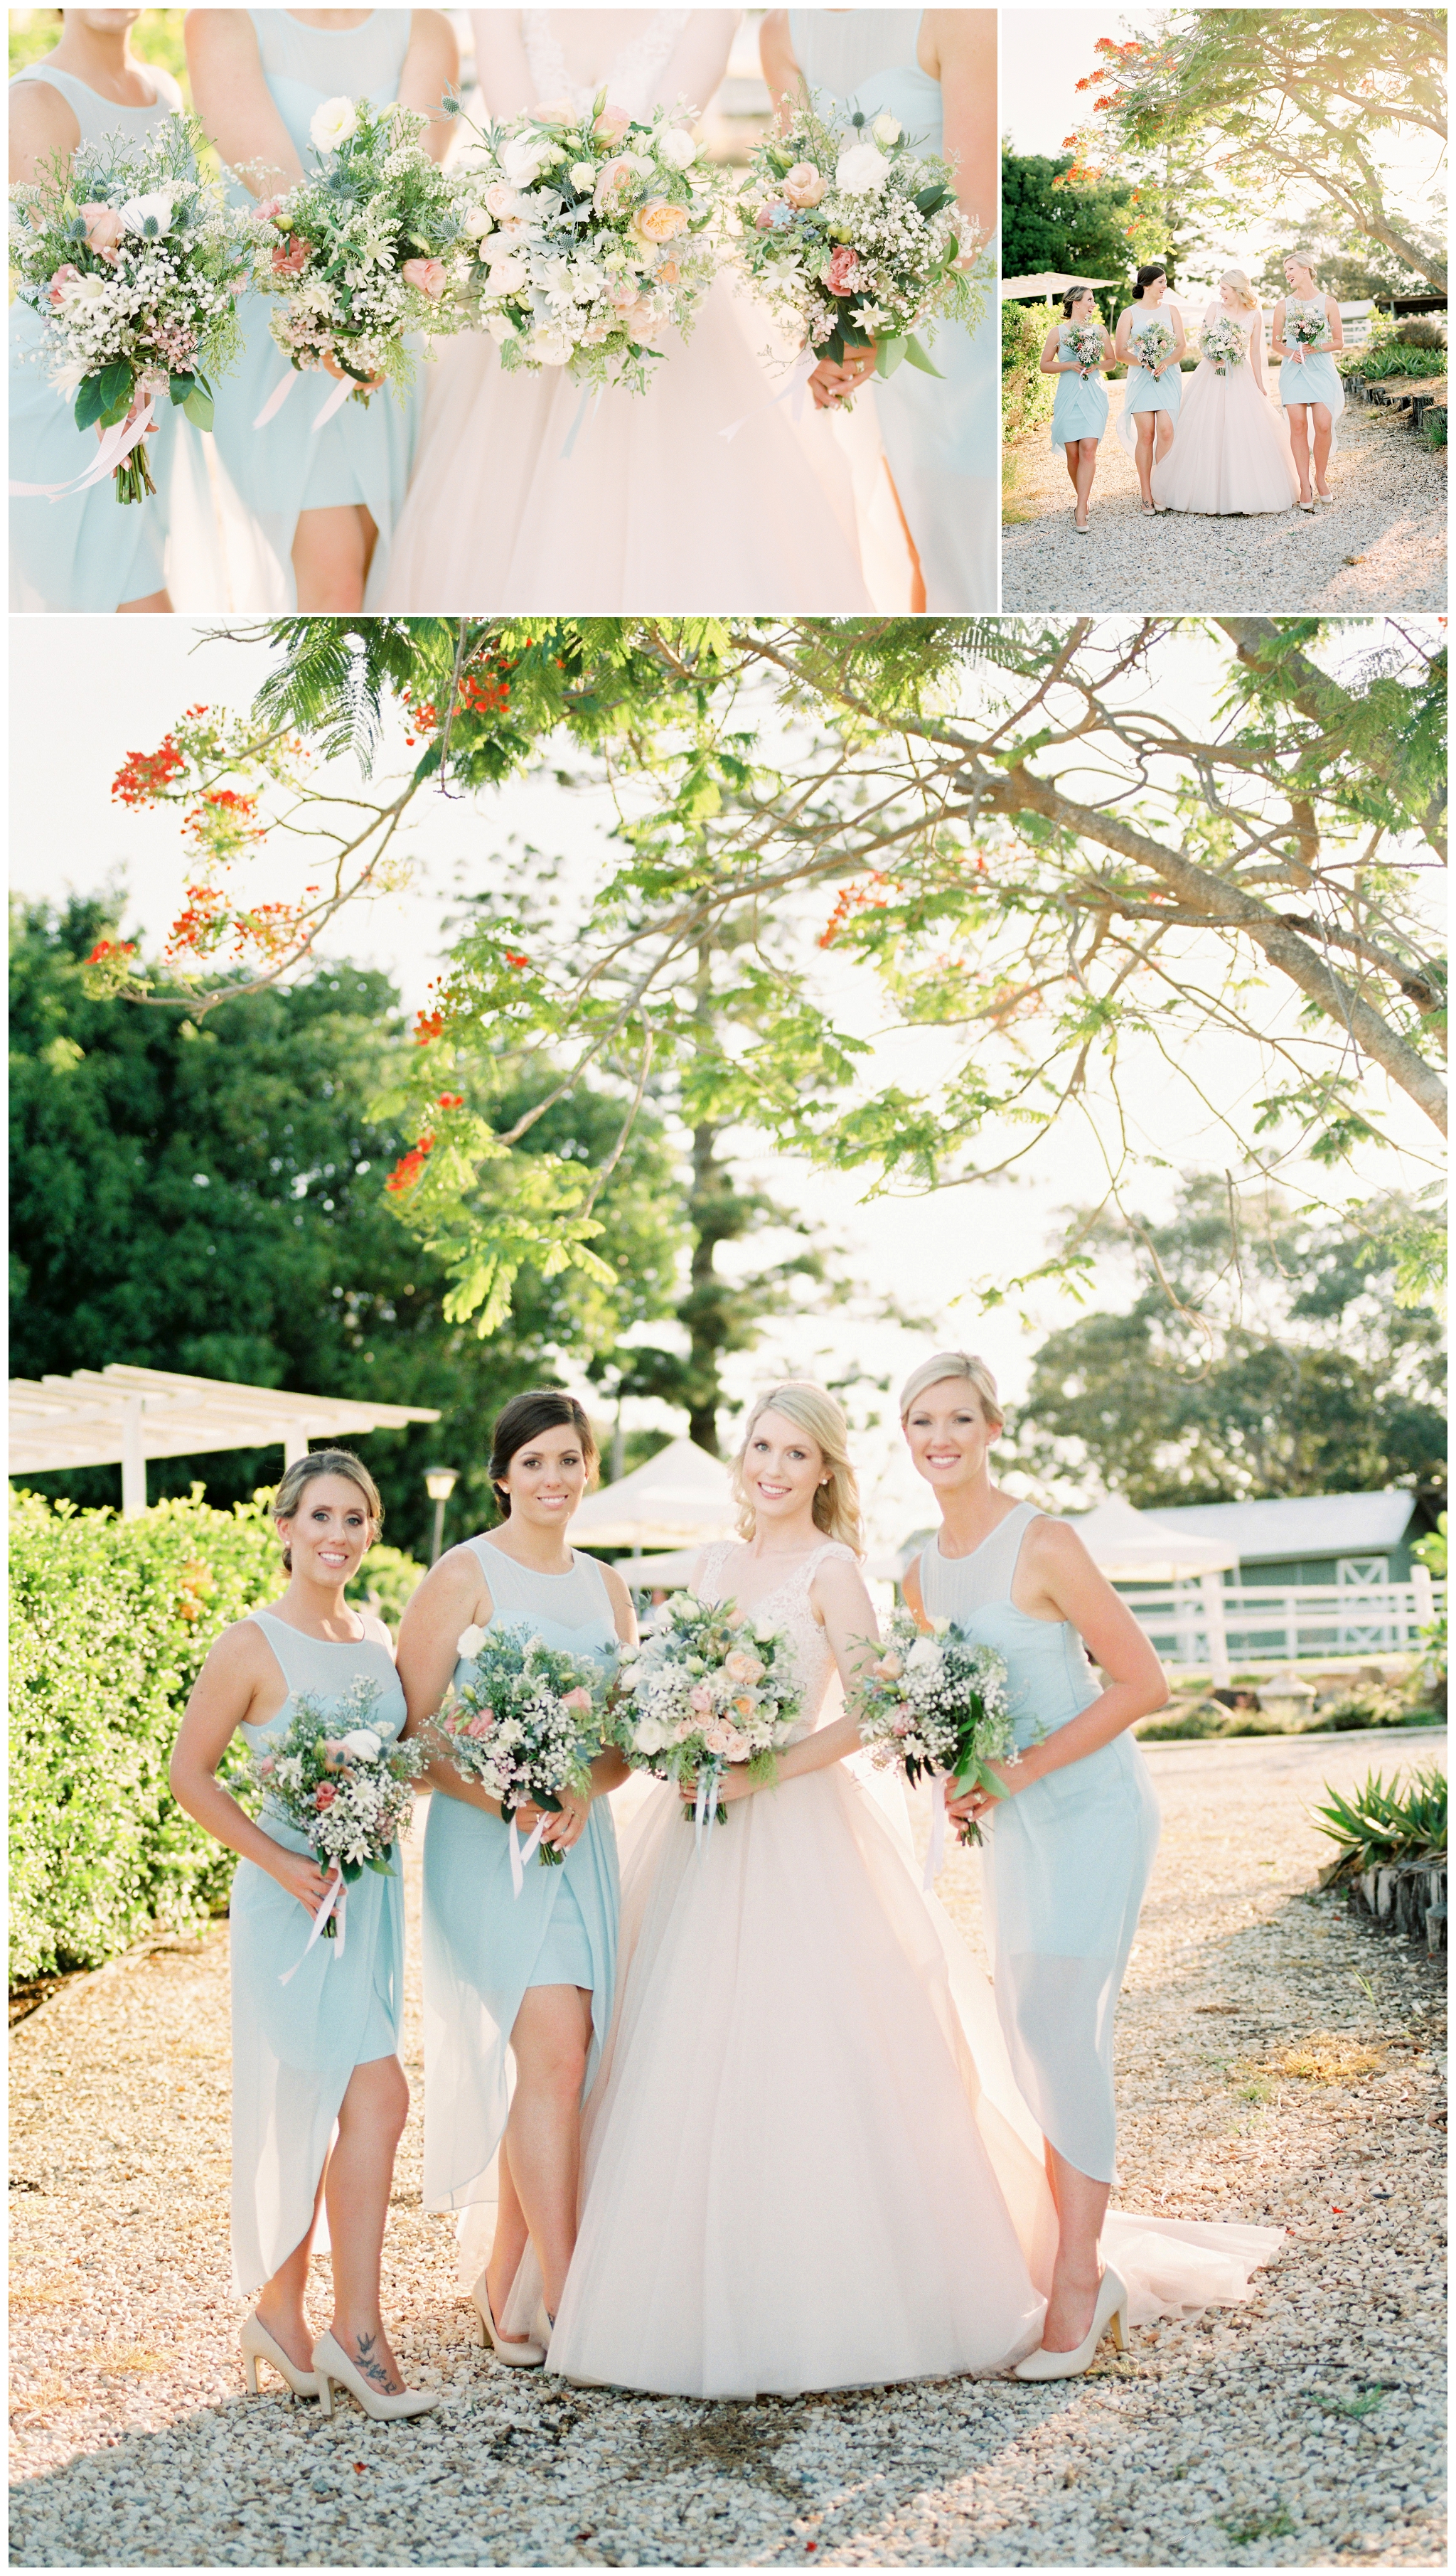 Tegan and Alex Wedding at Albert River Wines by Casey Jane Photography 51